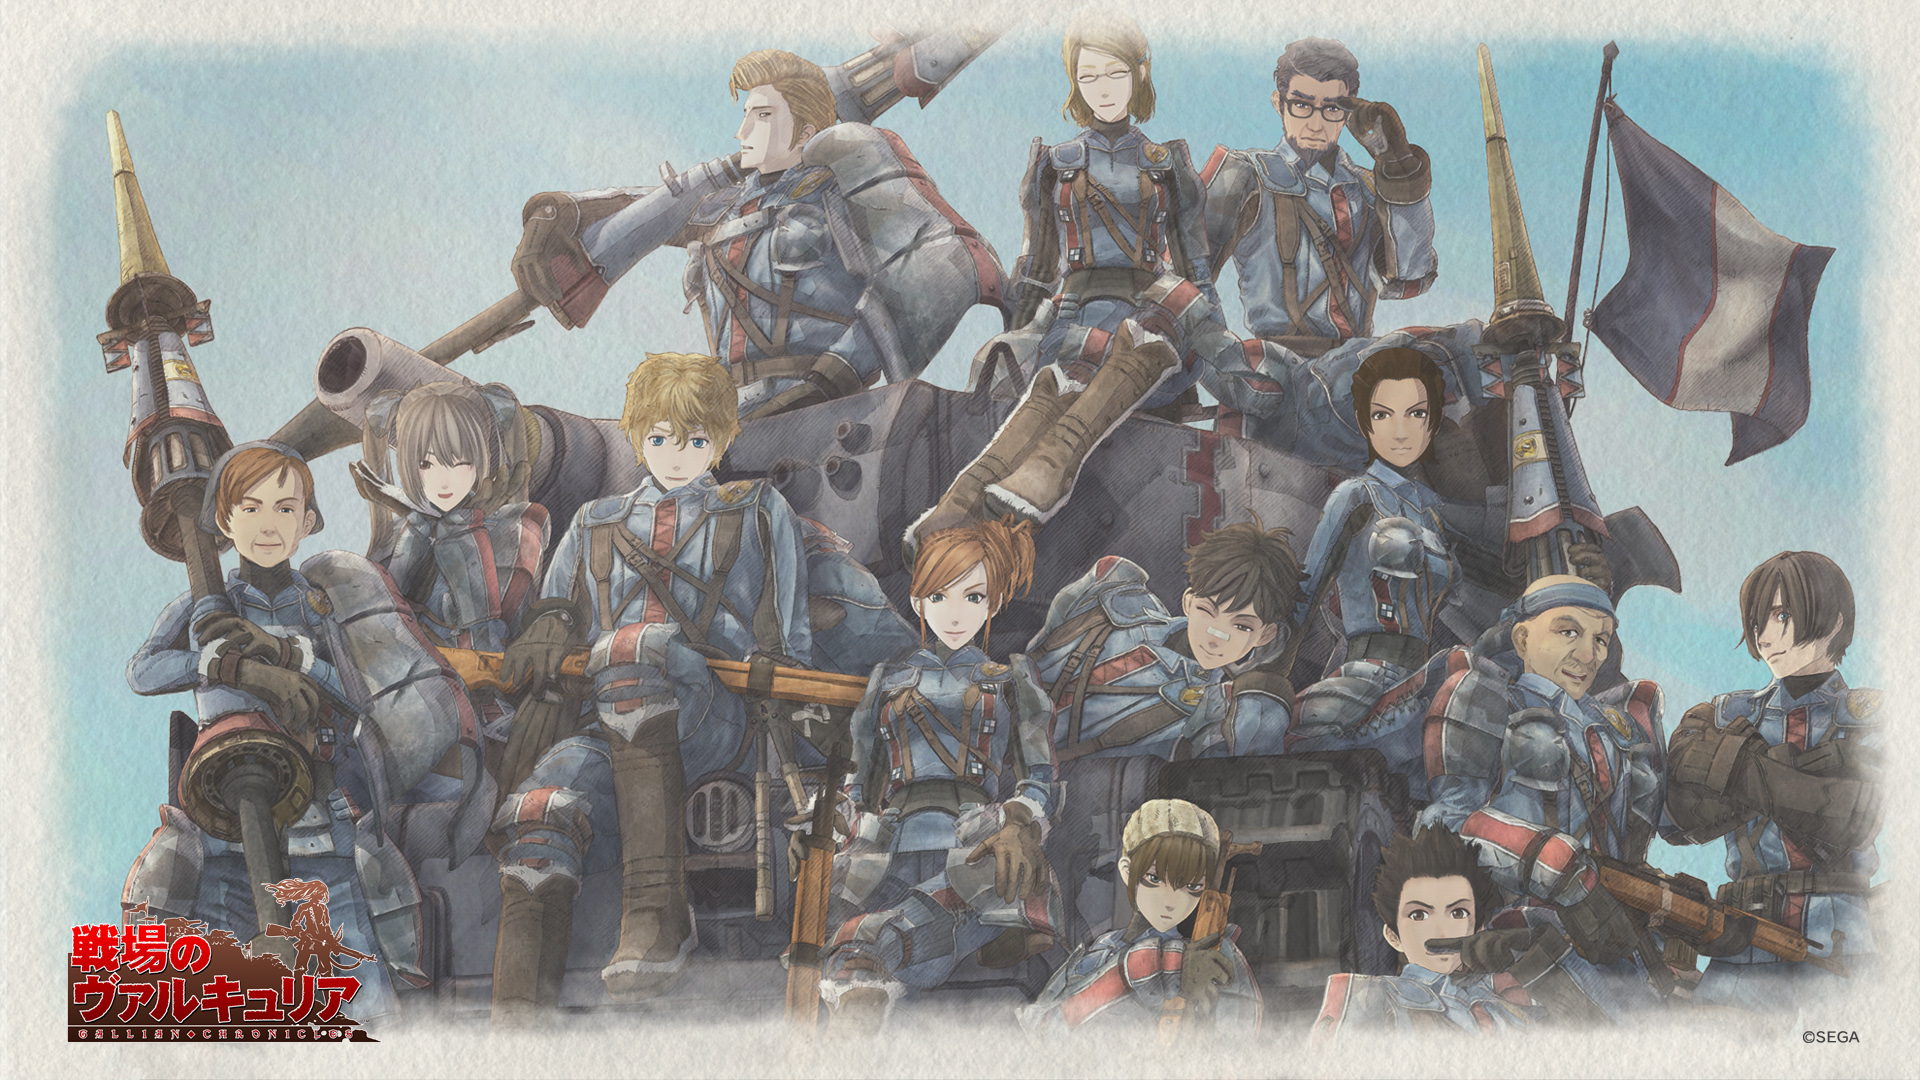 Anime 1920x1080 Valkyria Chronicles anime girls anime anime boys video games video game art Sega watermarked sitting video game characters title Japanese looking at viewer weapon screen shot one eye closed uniform